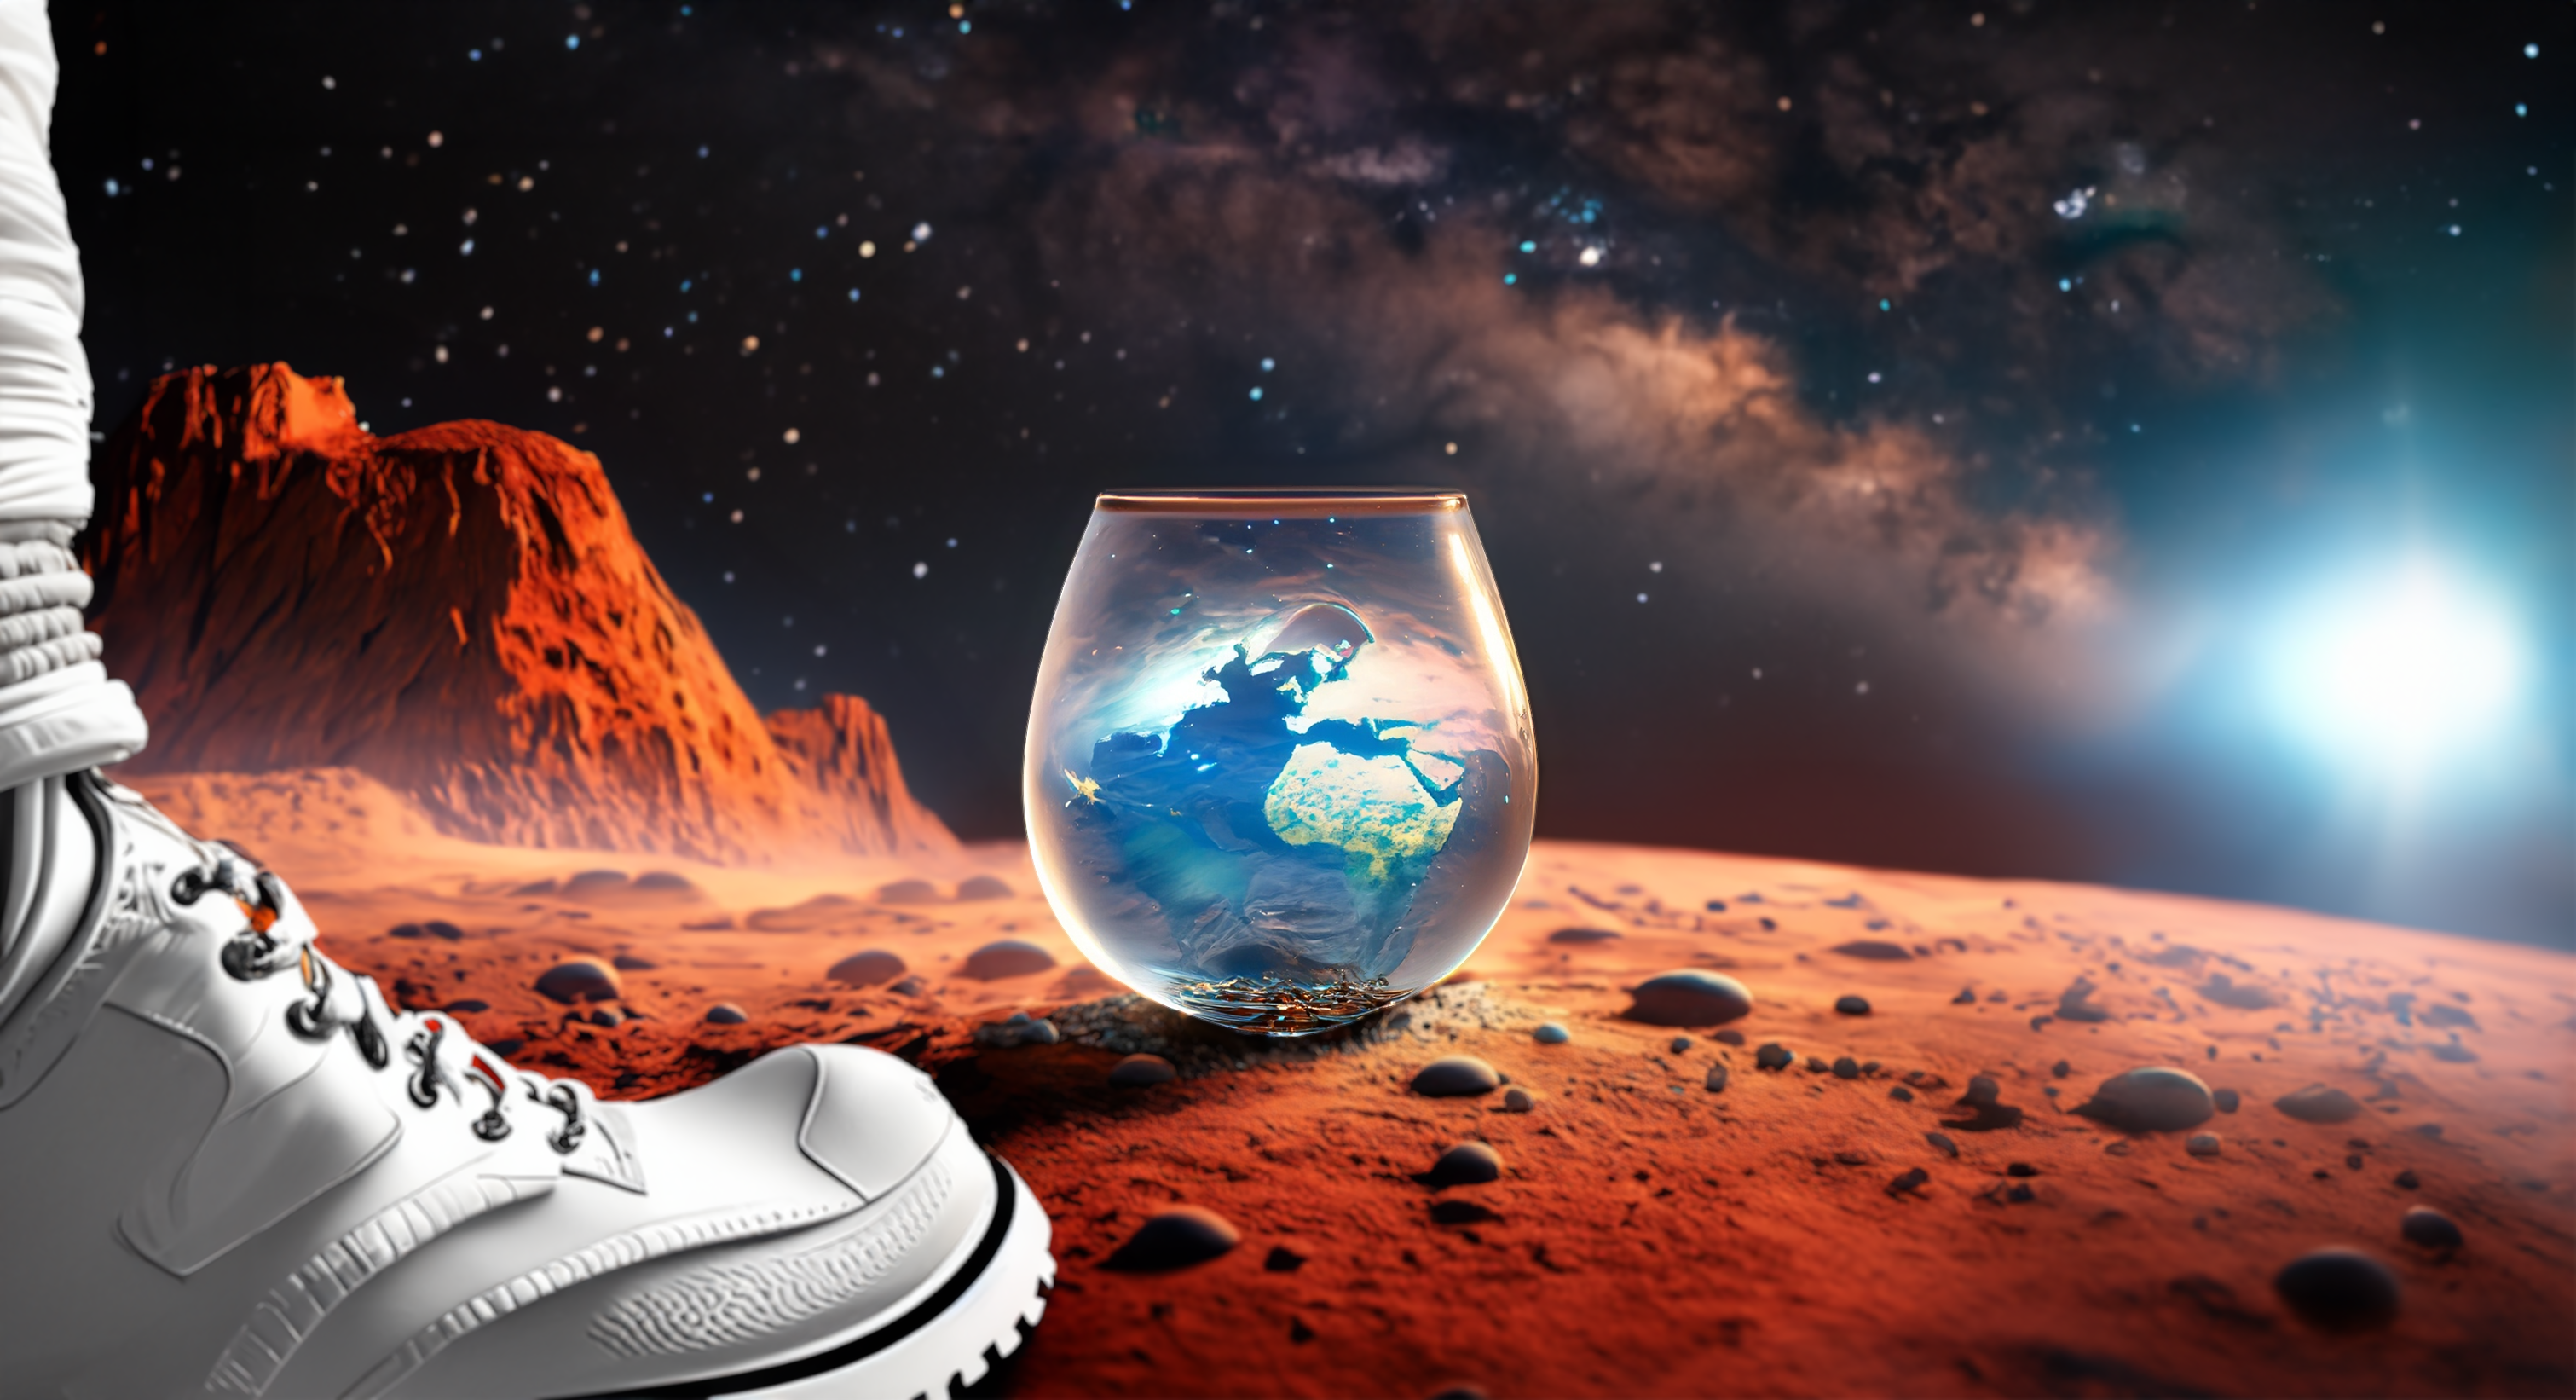 An image showing a glass of liquid on the surface of Mars. There is a leg of an astronaut nearby.